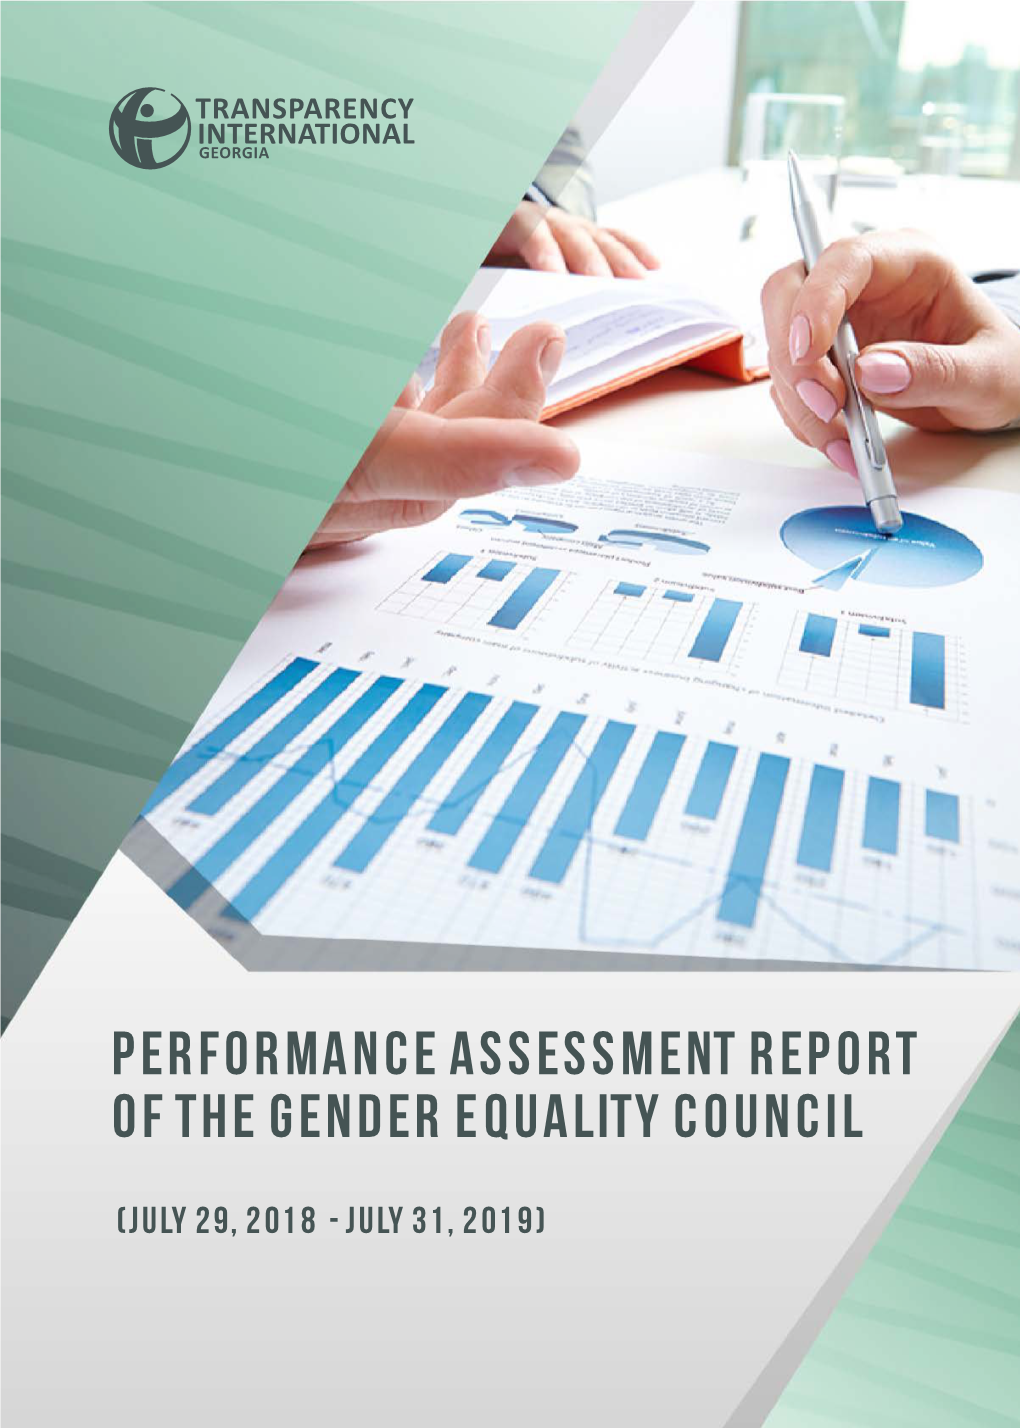 Performance Assessment Report of the Gender Equality Council